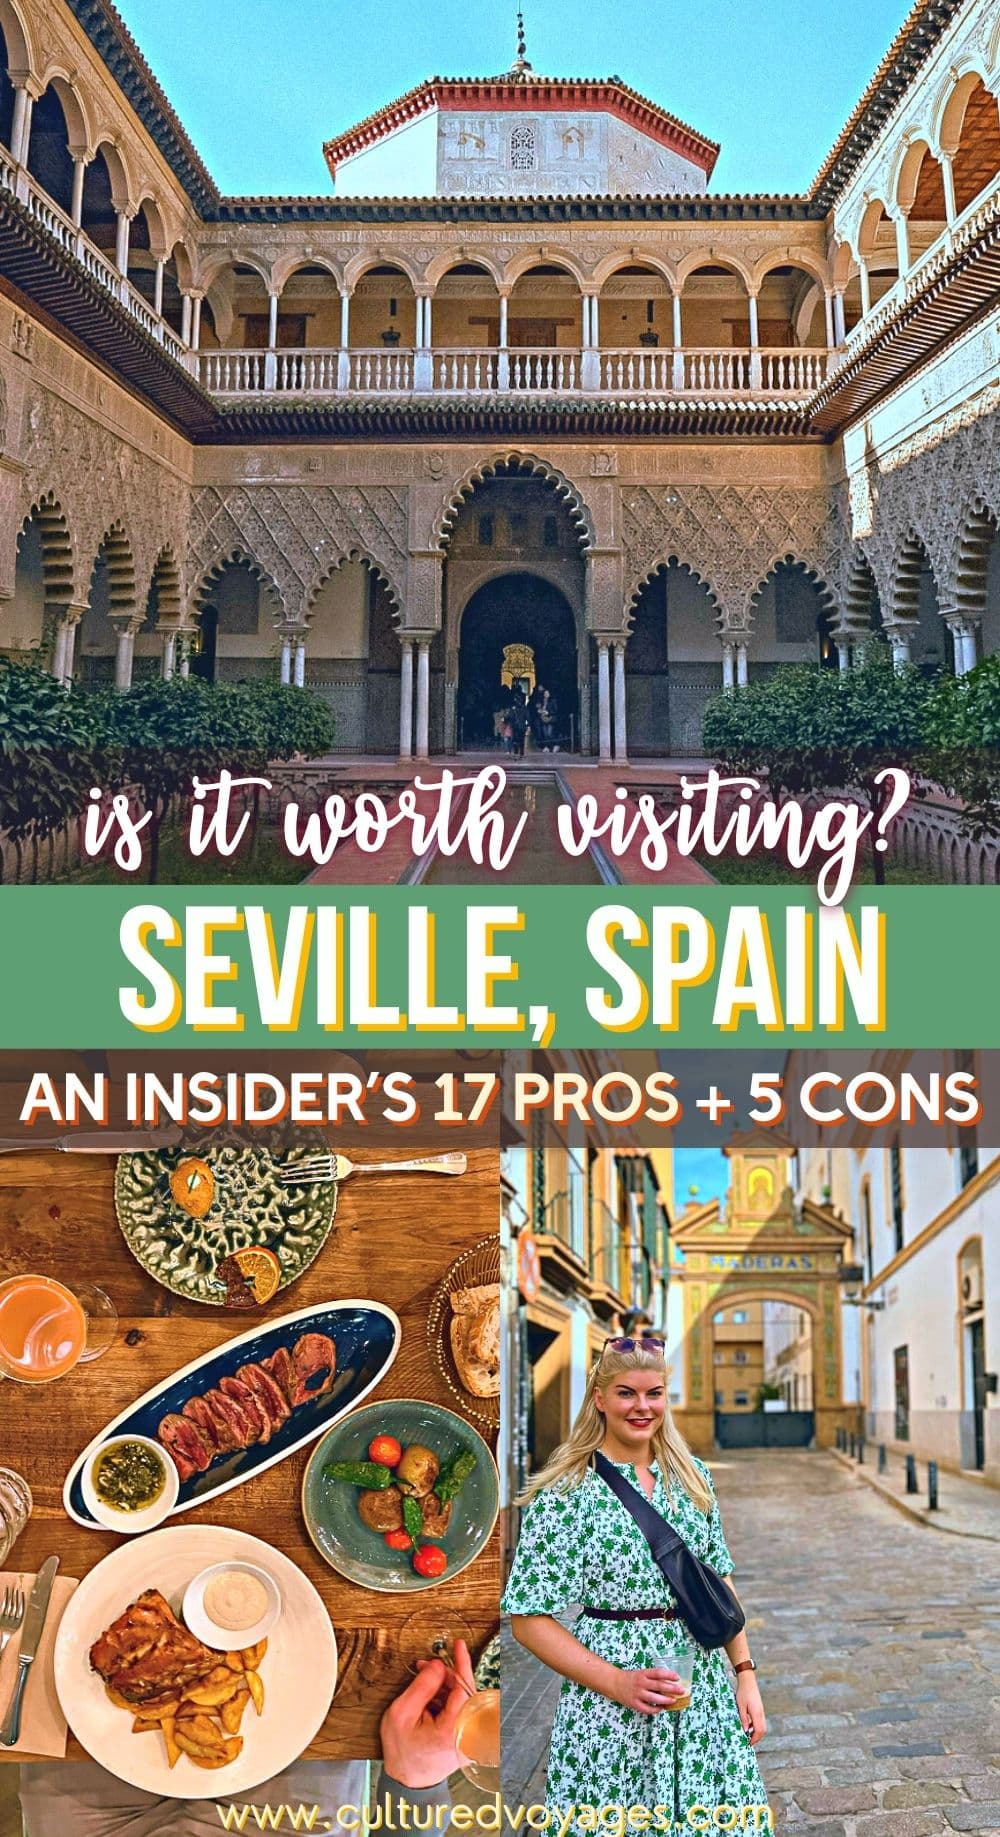 is seville worth visiting pinterest pin cover, an open garden space inside a a building with Arabic architectural designs and trees, meat dishes on a wooden table, and me in the foreground of a street